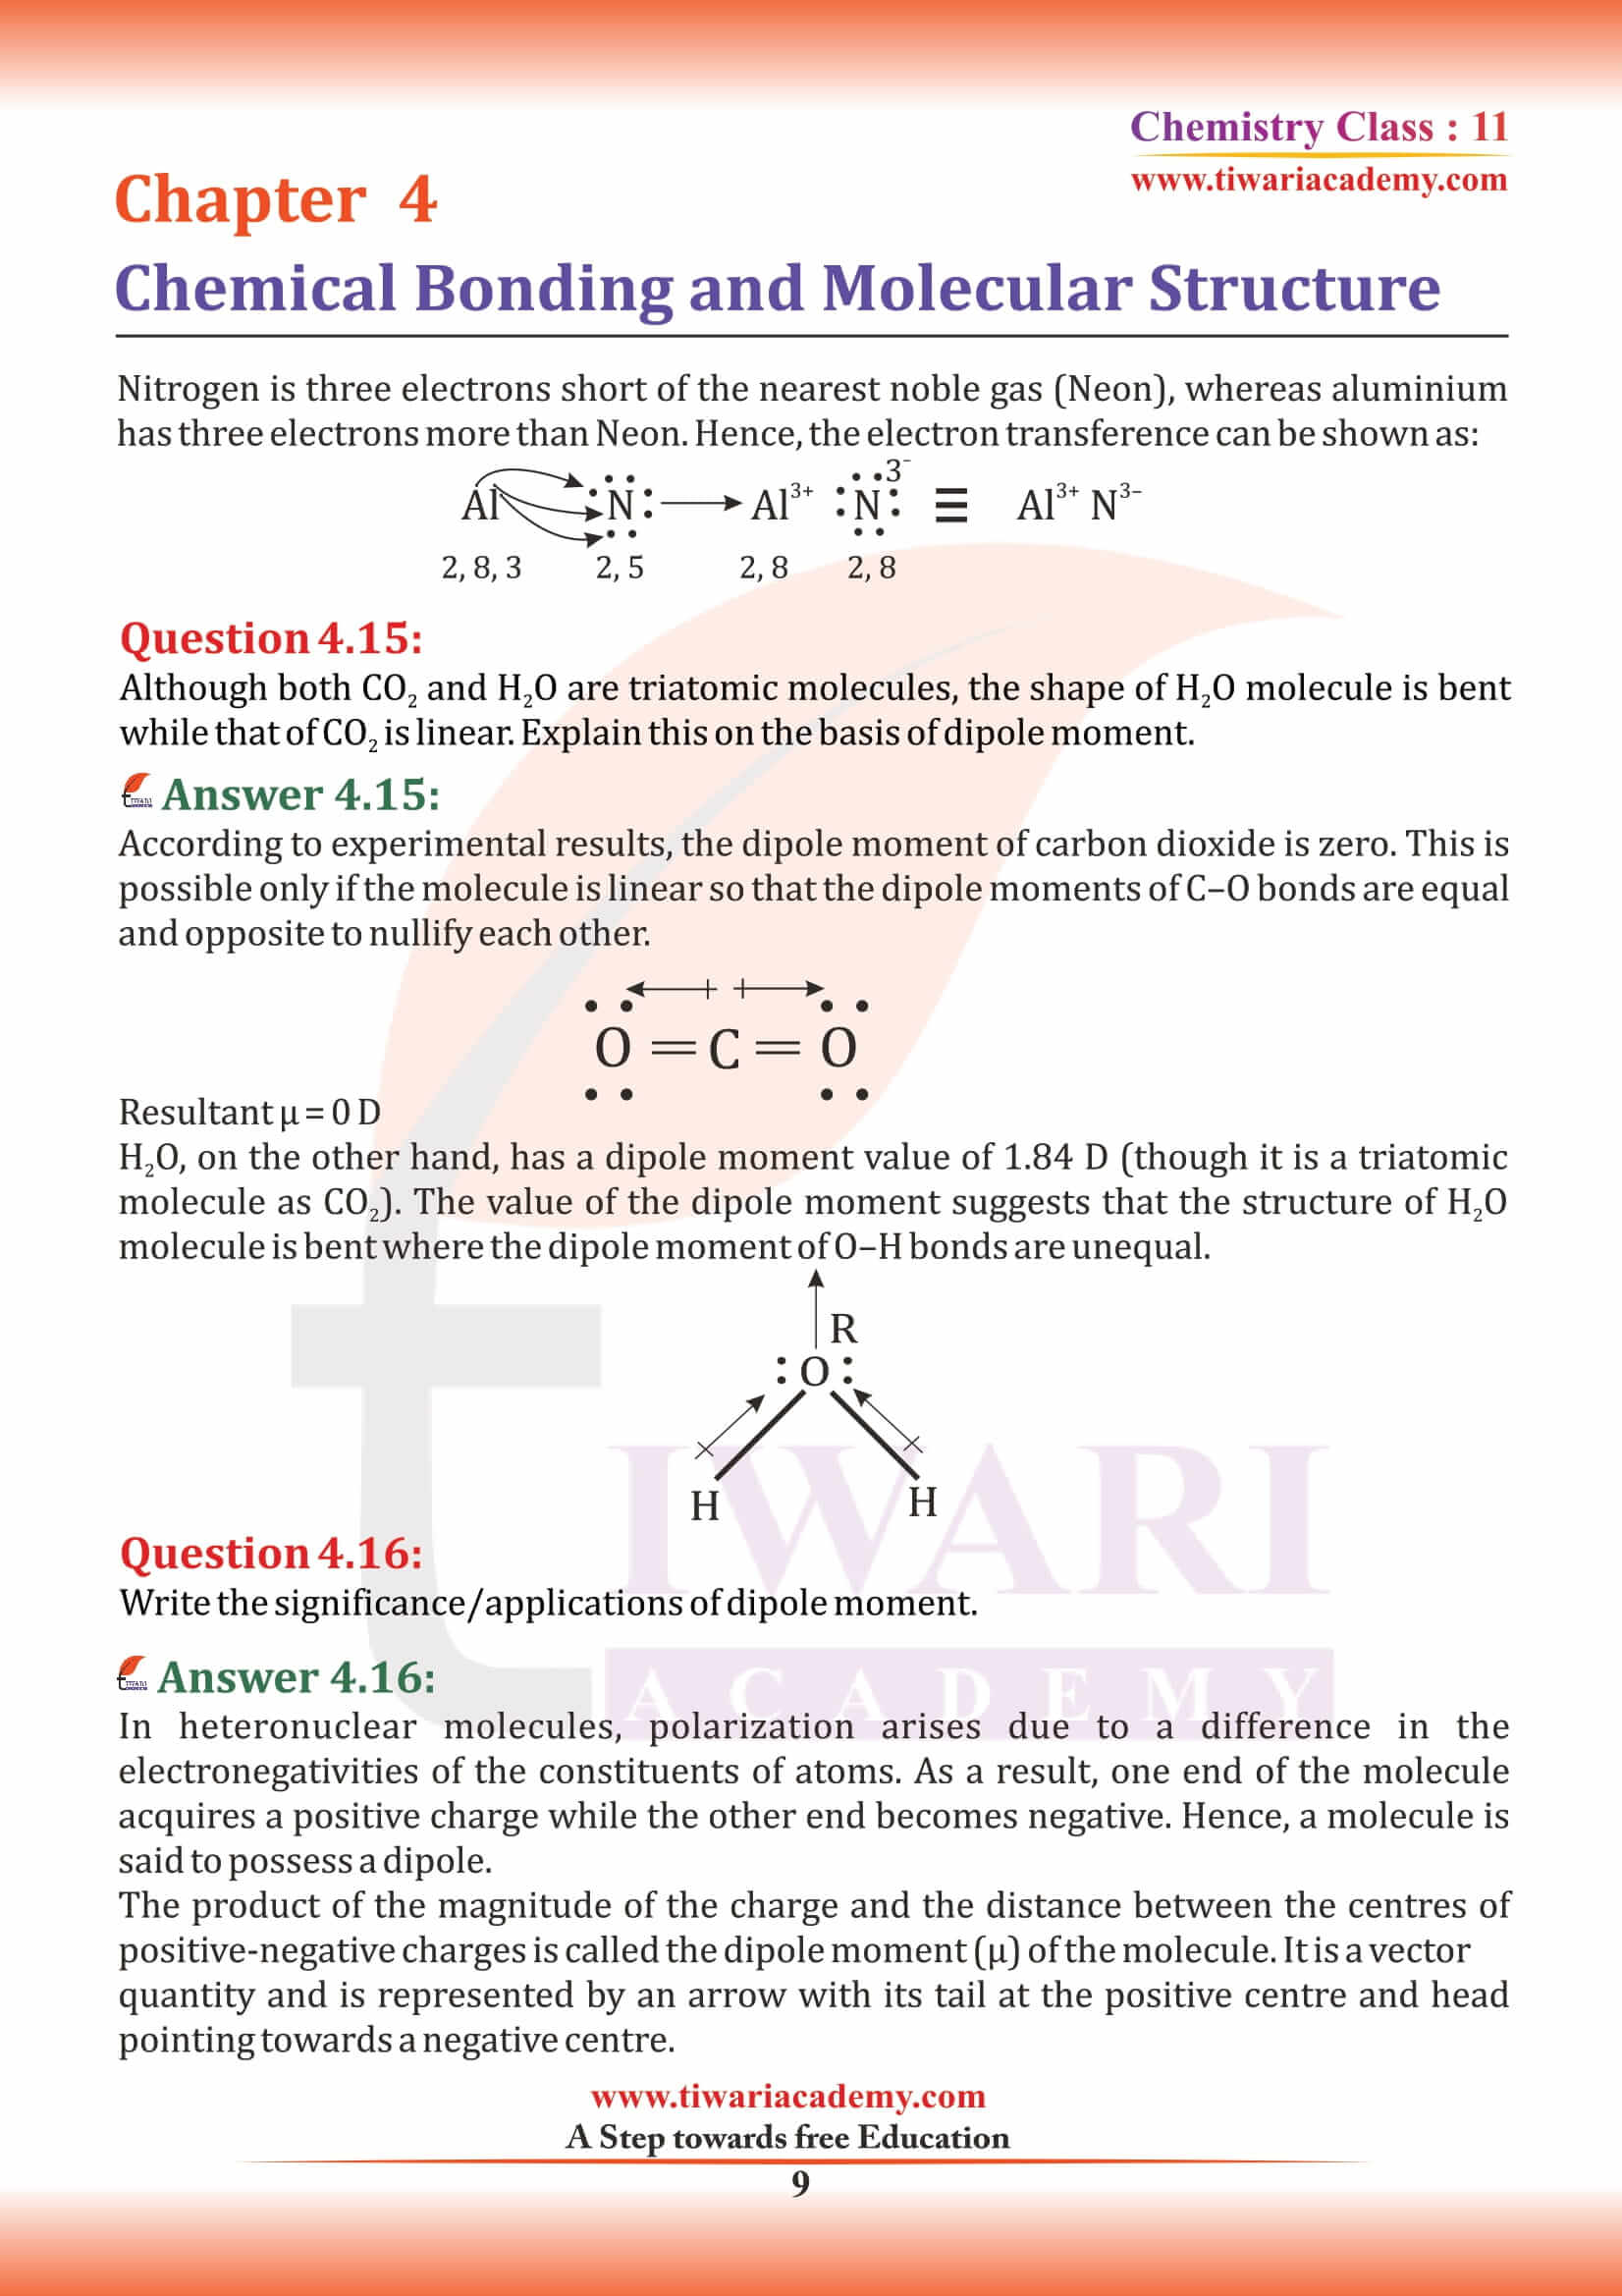 NCERT Solutions for Class 11 Chemistry Chapter 4 intext questions